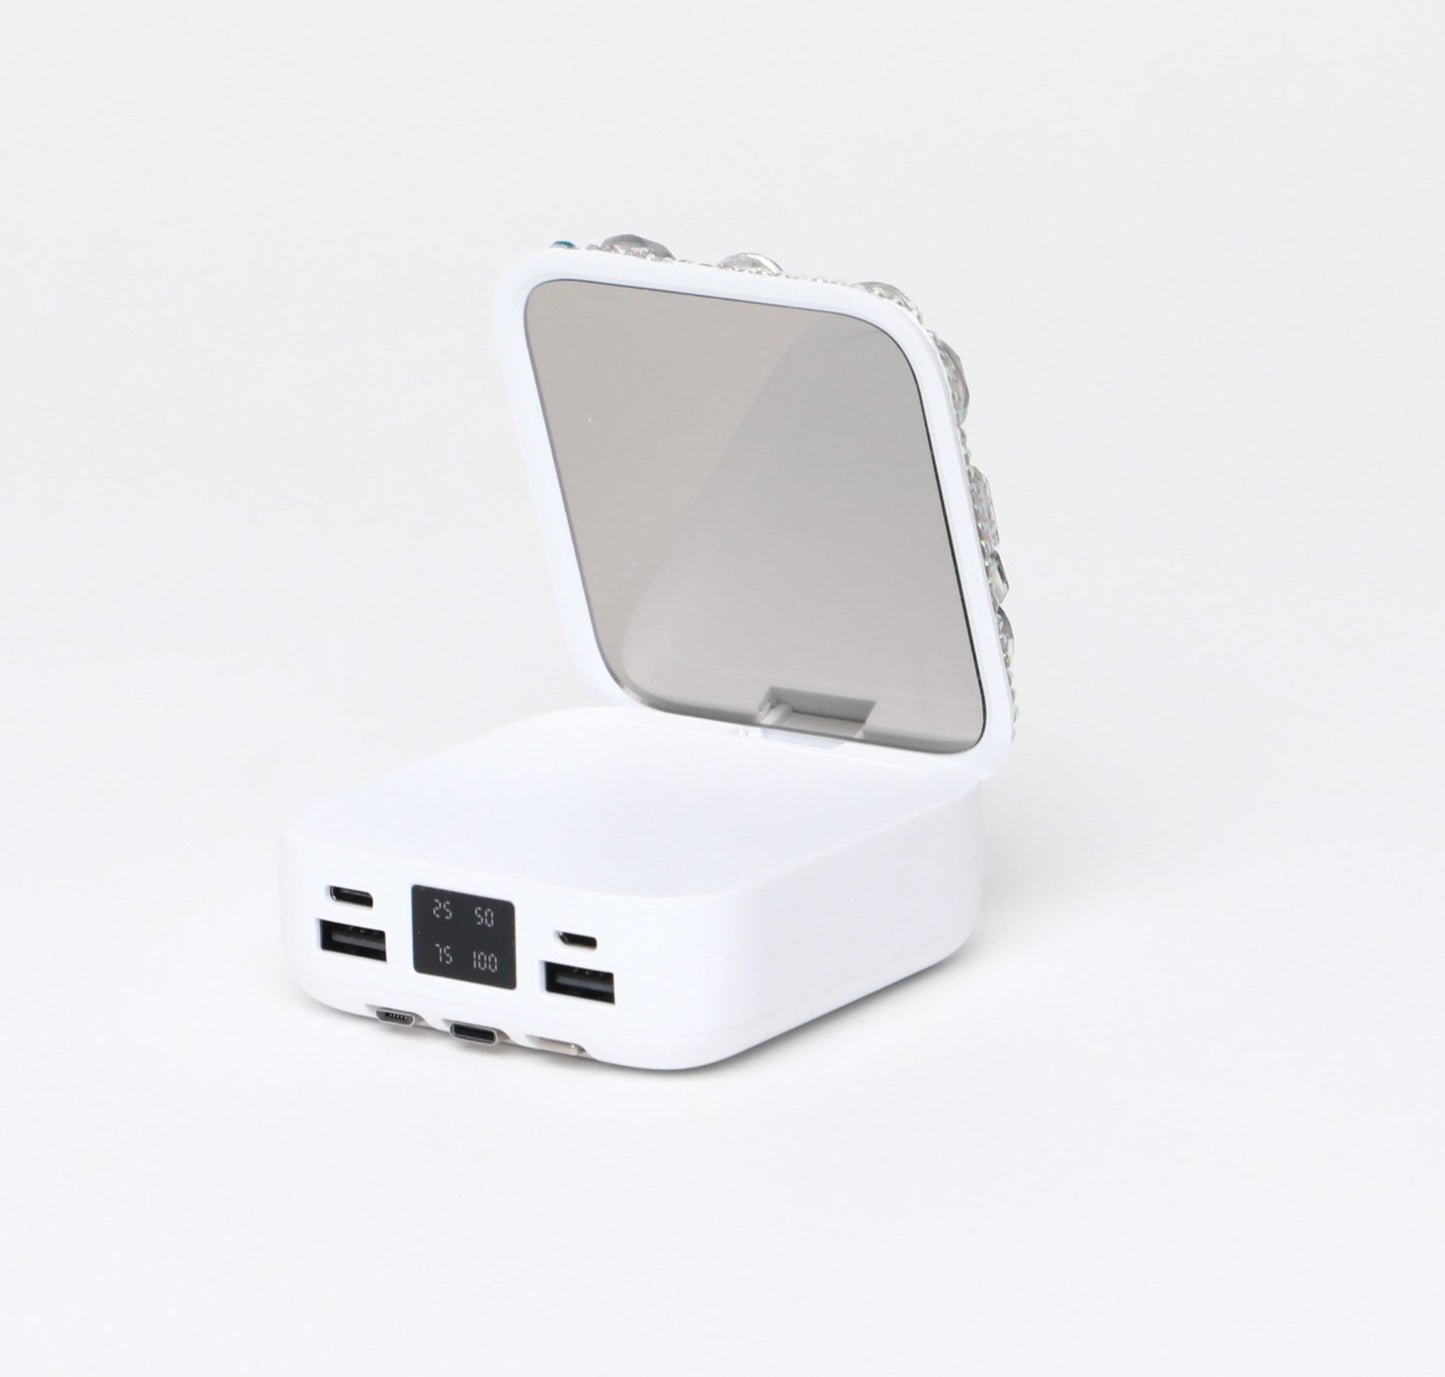 GUINEP ICE POWER BANK